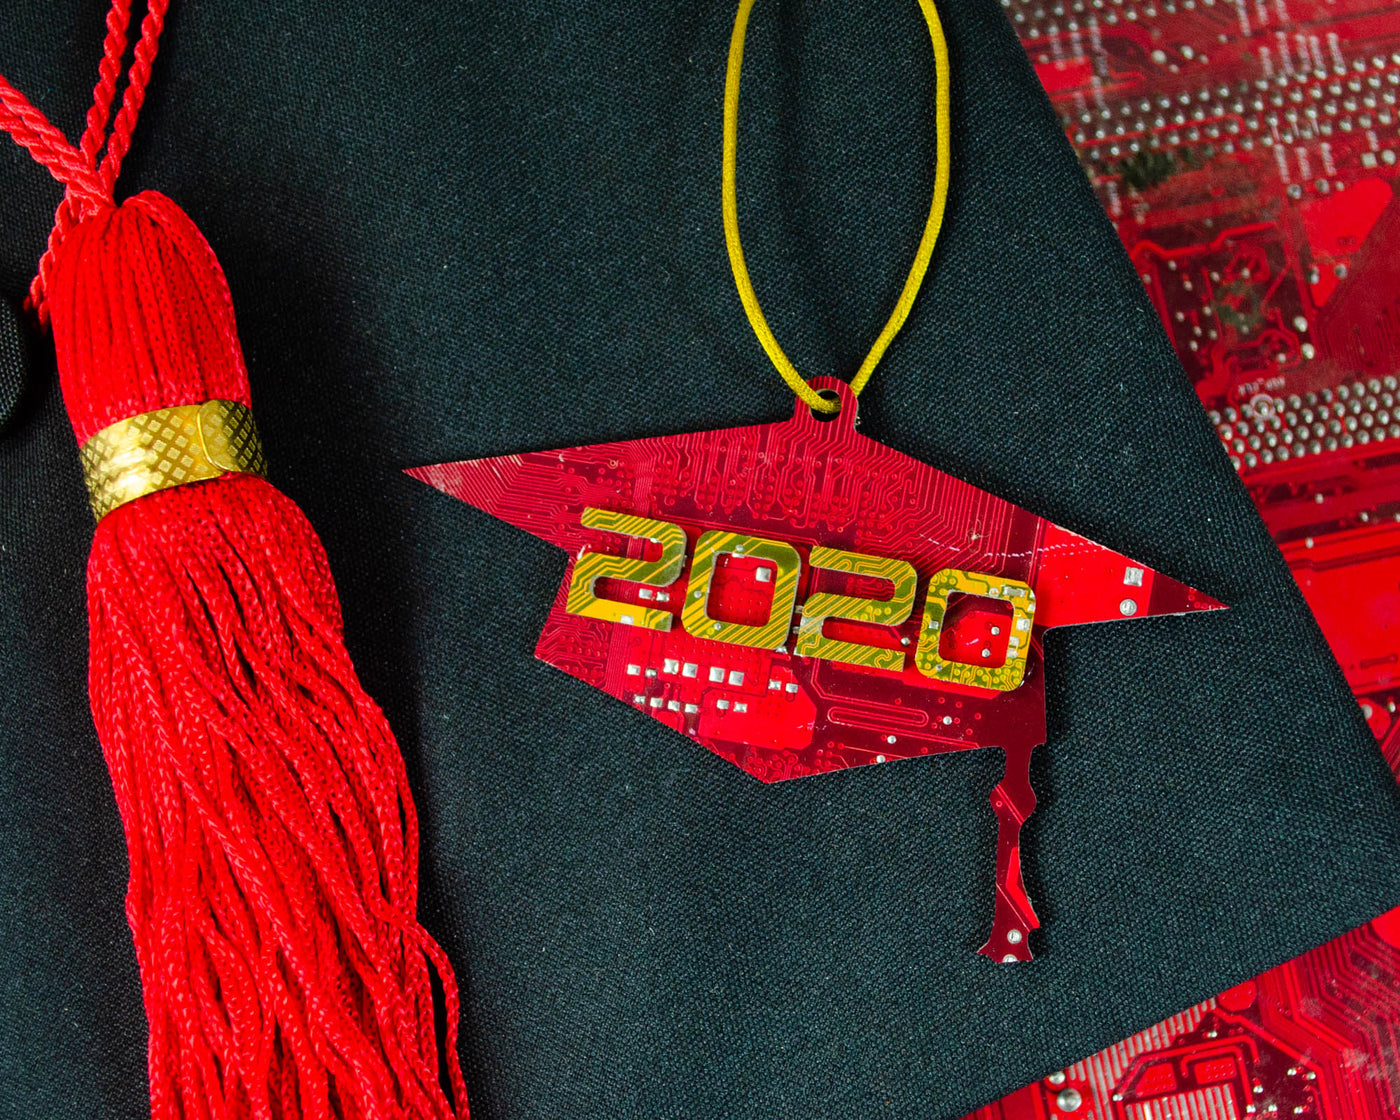 Handmade graduation cap ornament made from recycled circuit boards for 2020